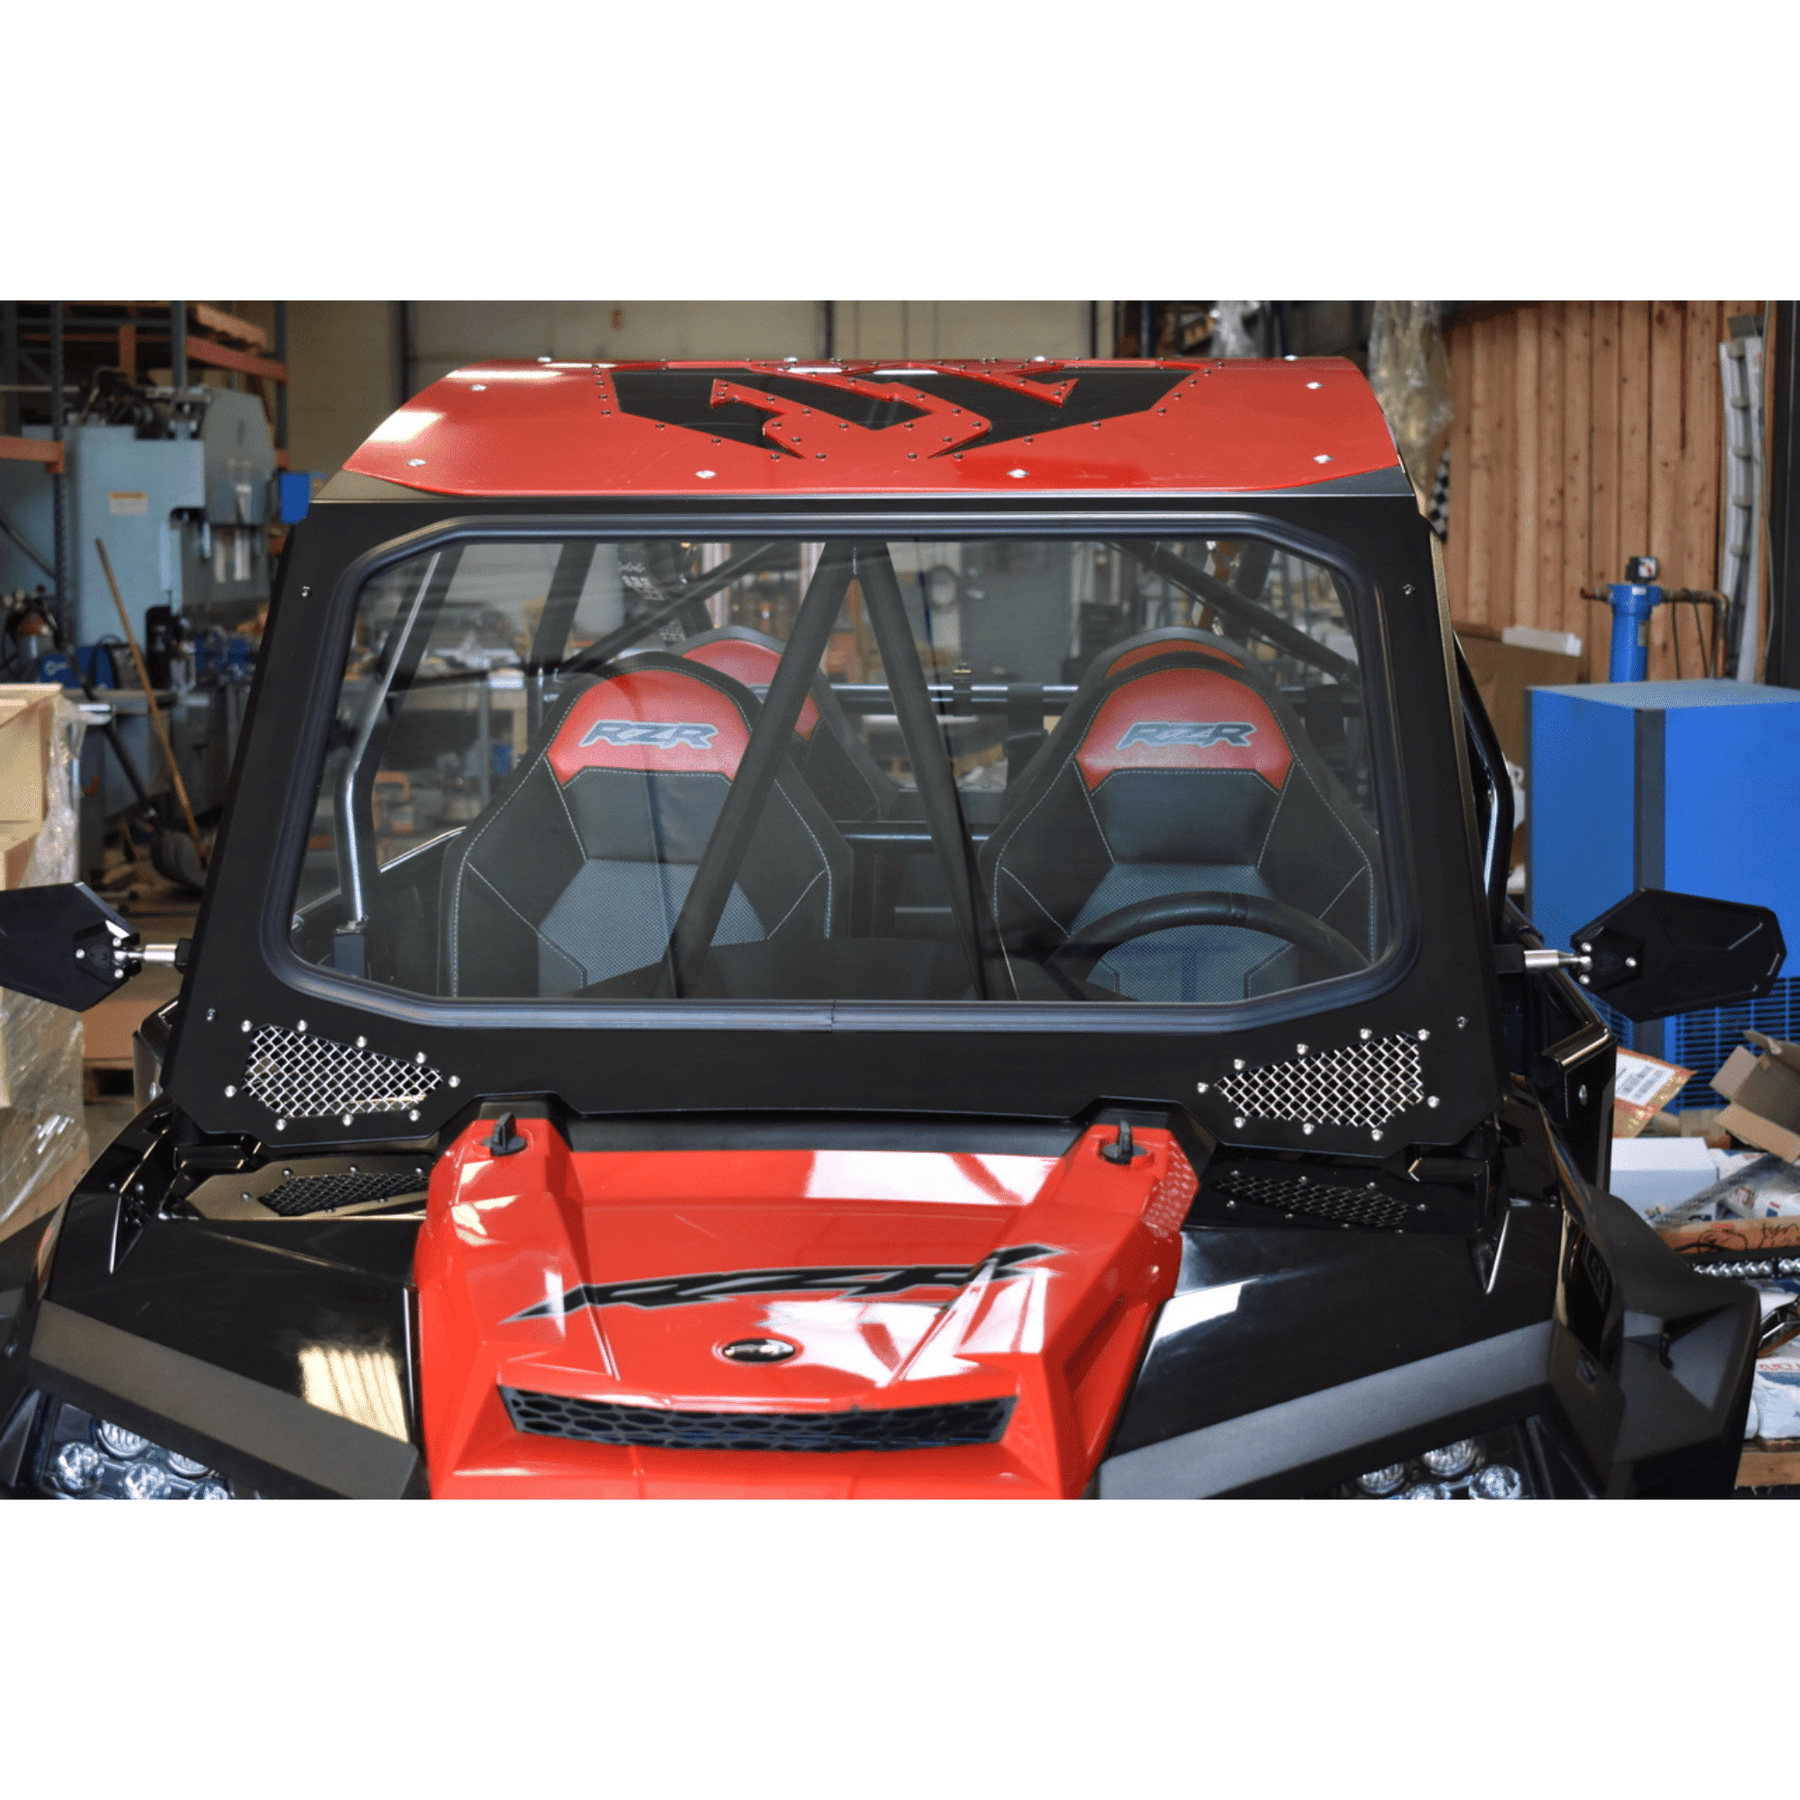 Polaris RZR 900, 1000, & Turbo Full Glass Windshield for CageWrx Race Cage (2014+)